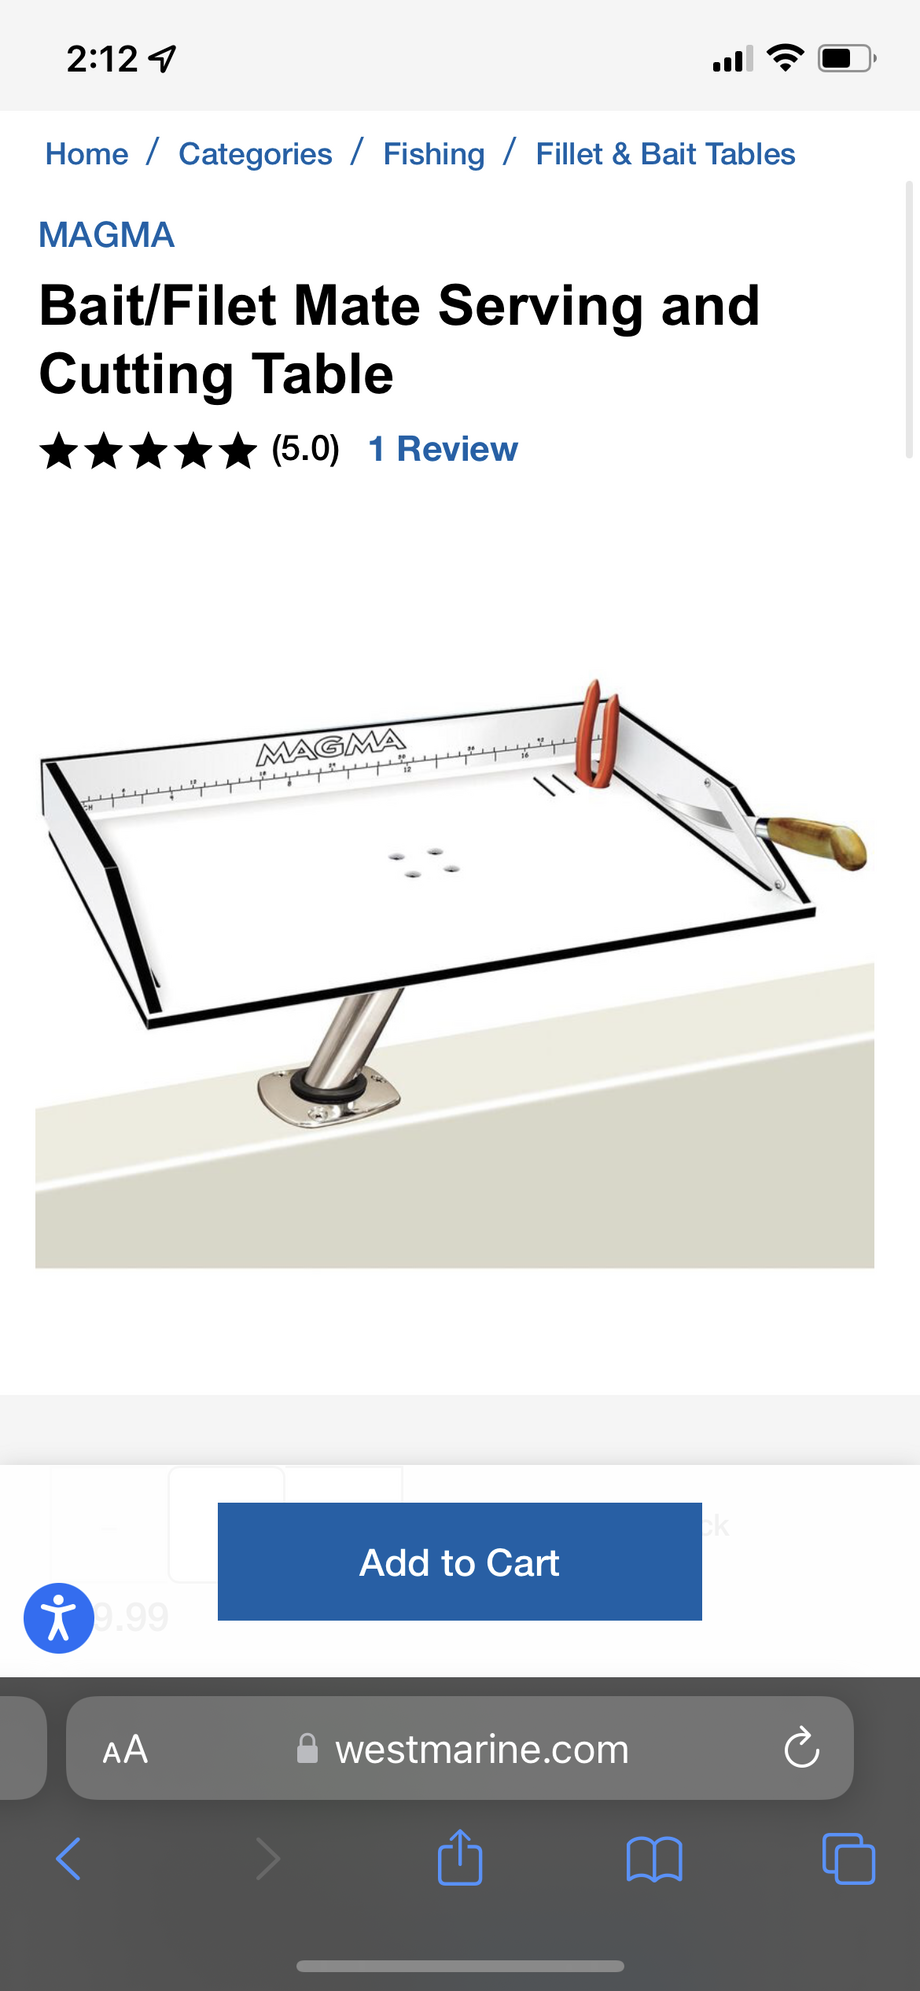 Bait cutting table advice - The Hull Truth - Boating and Fishing Forum